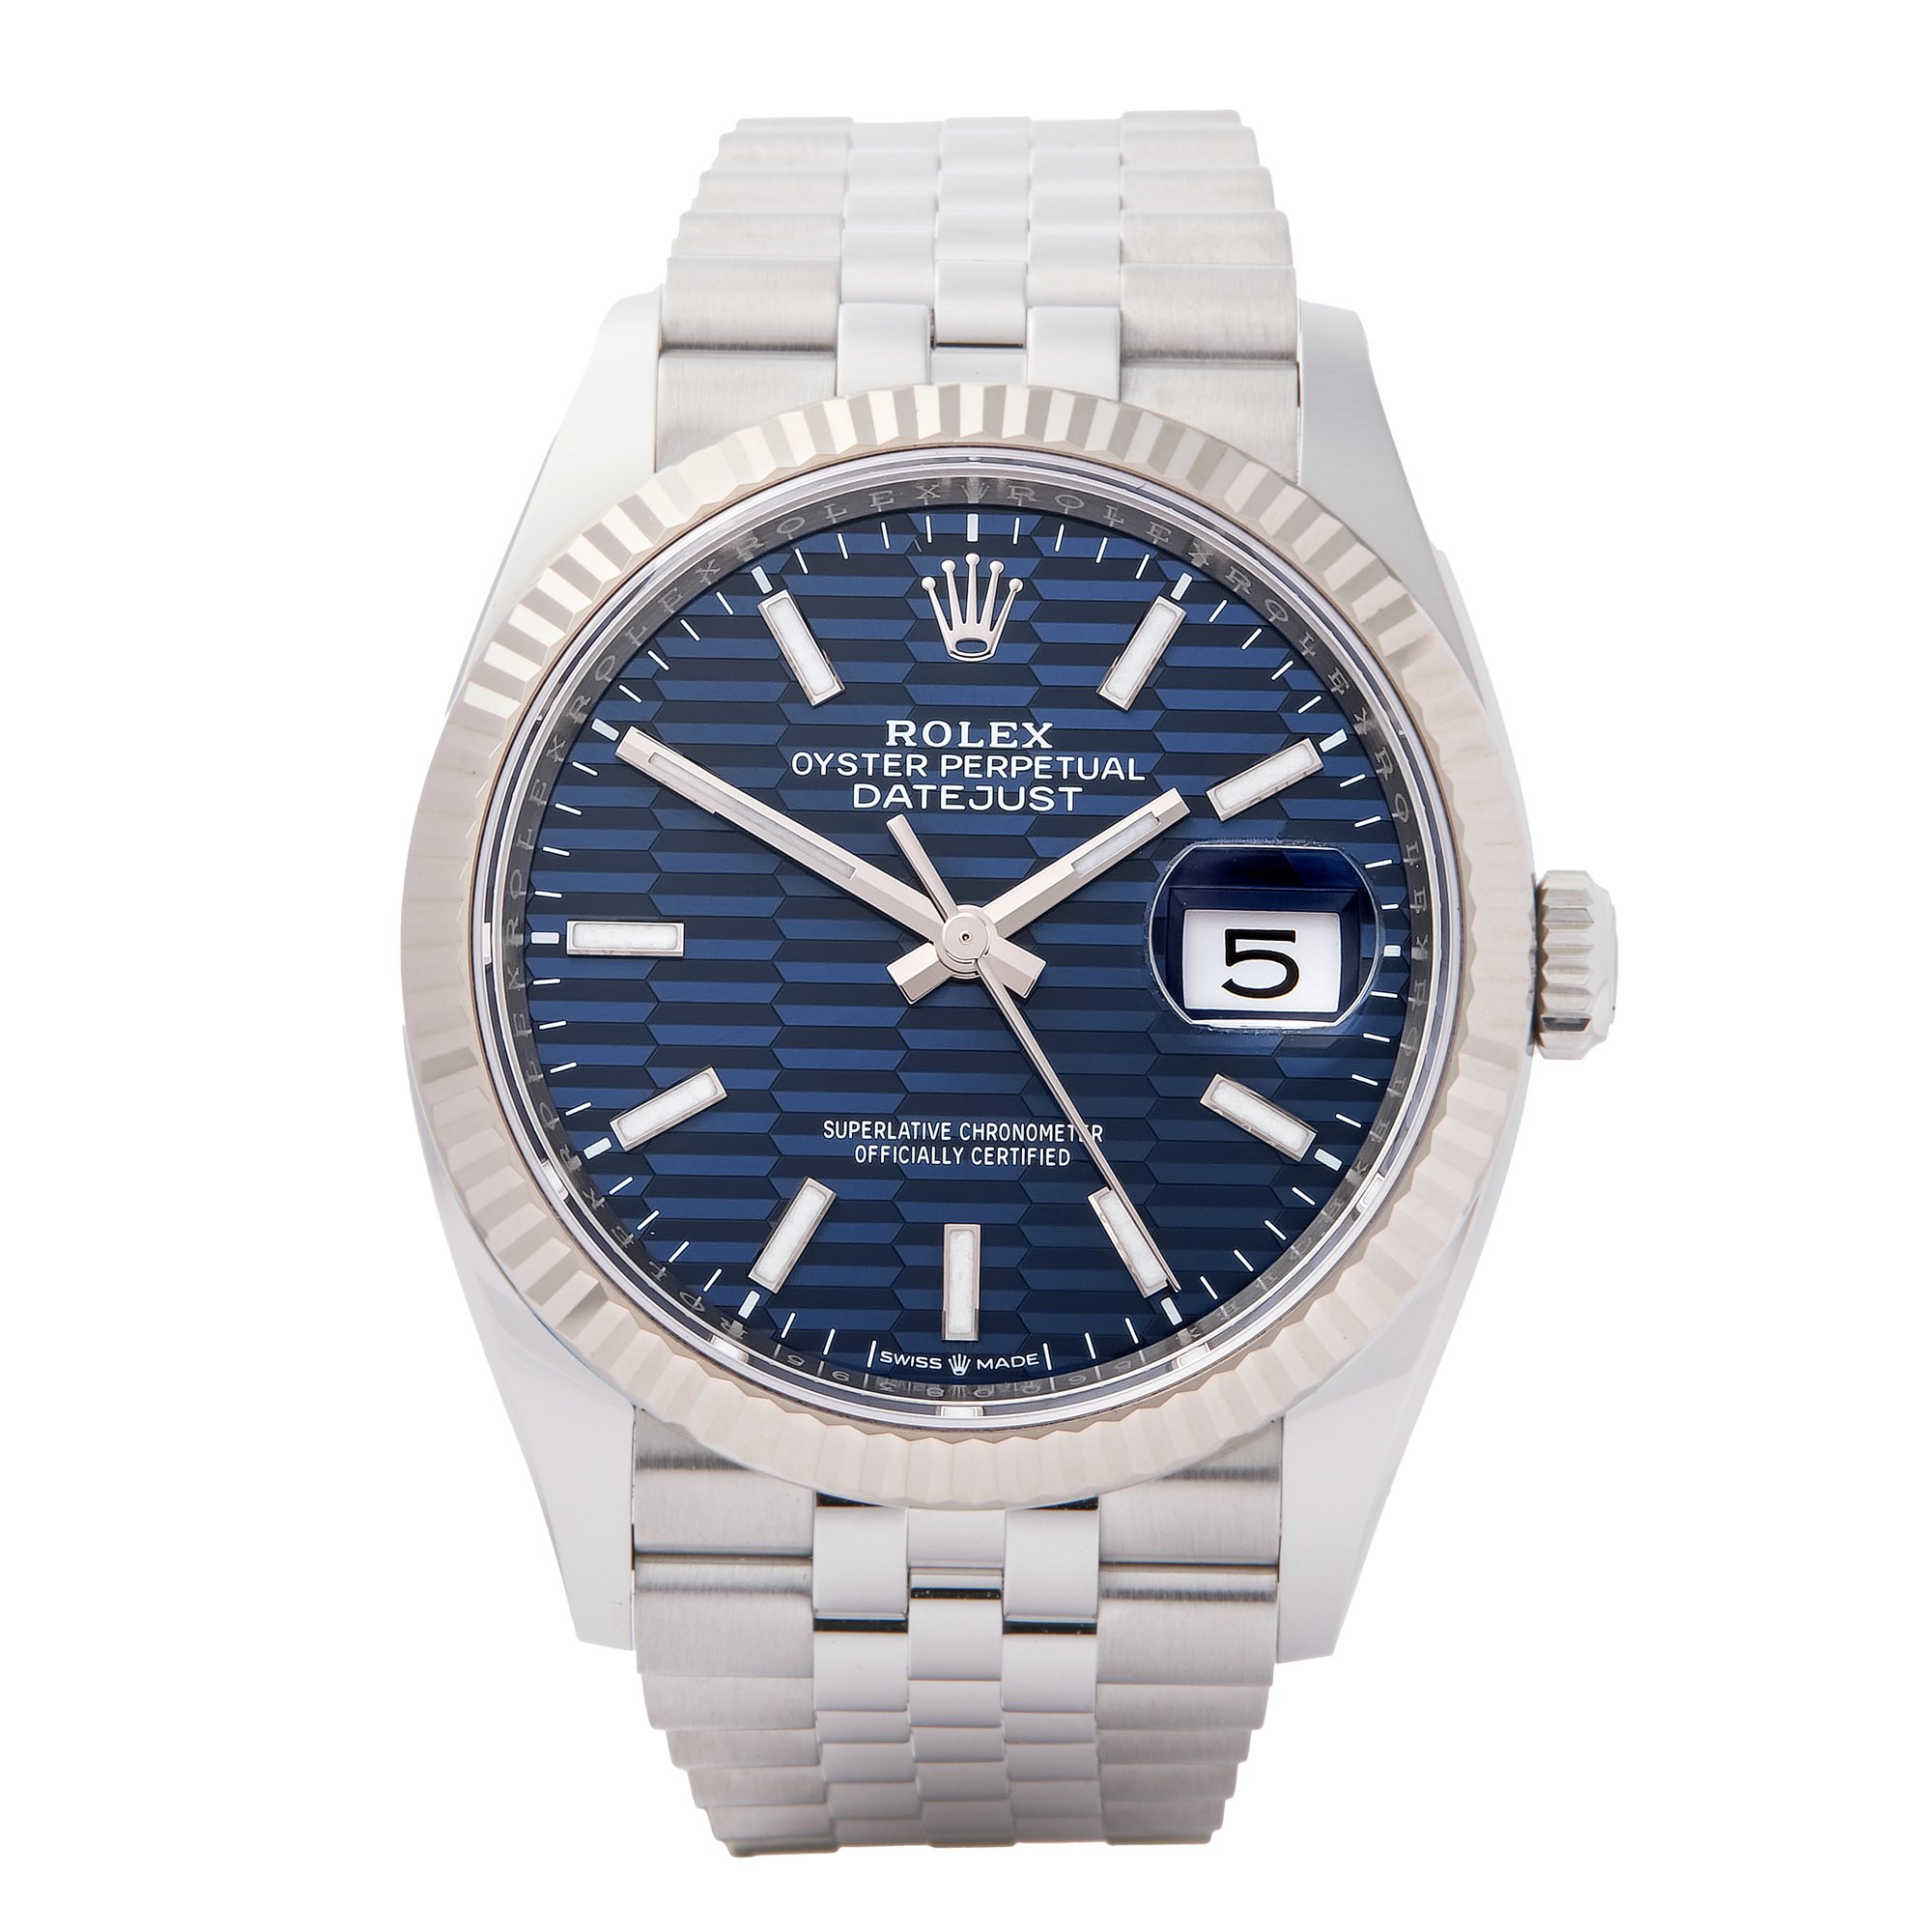 Rolex Datejust 36 White Gold & Stainless Steel 126234